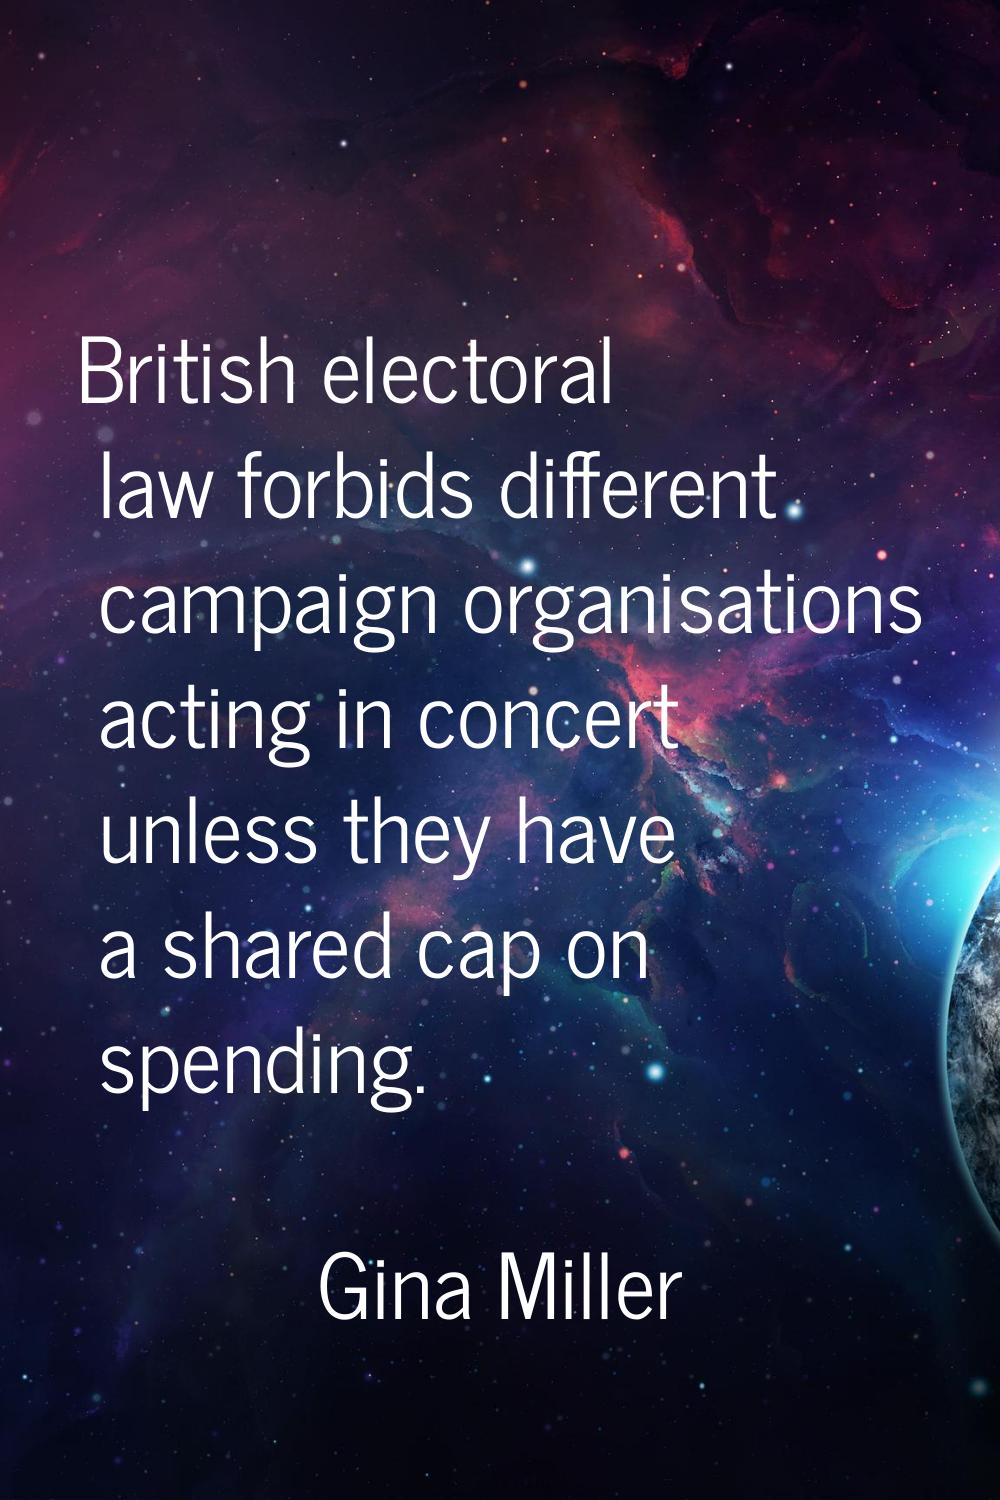 British electoral law forbids different campaign organisations acting in concert unless they have a